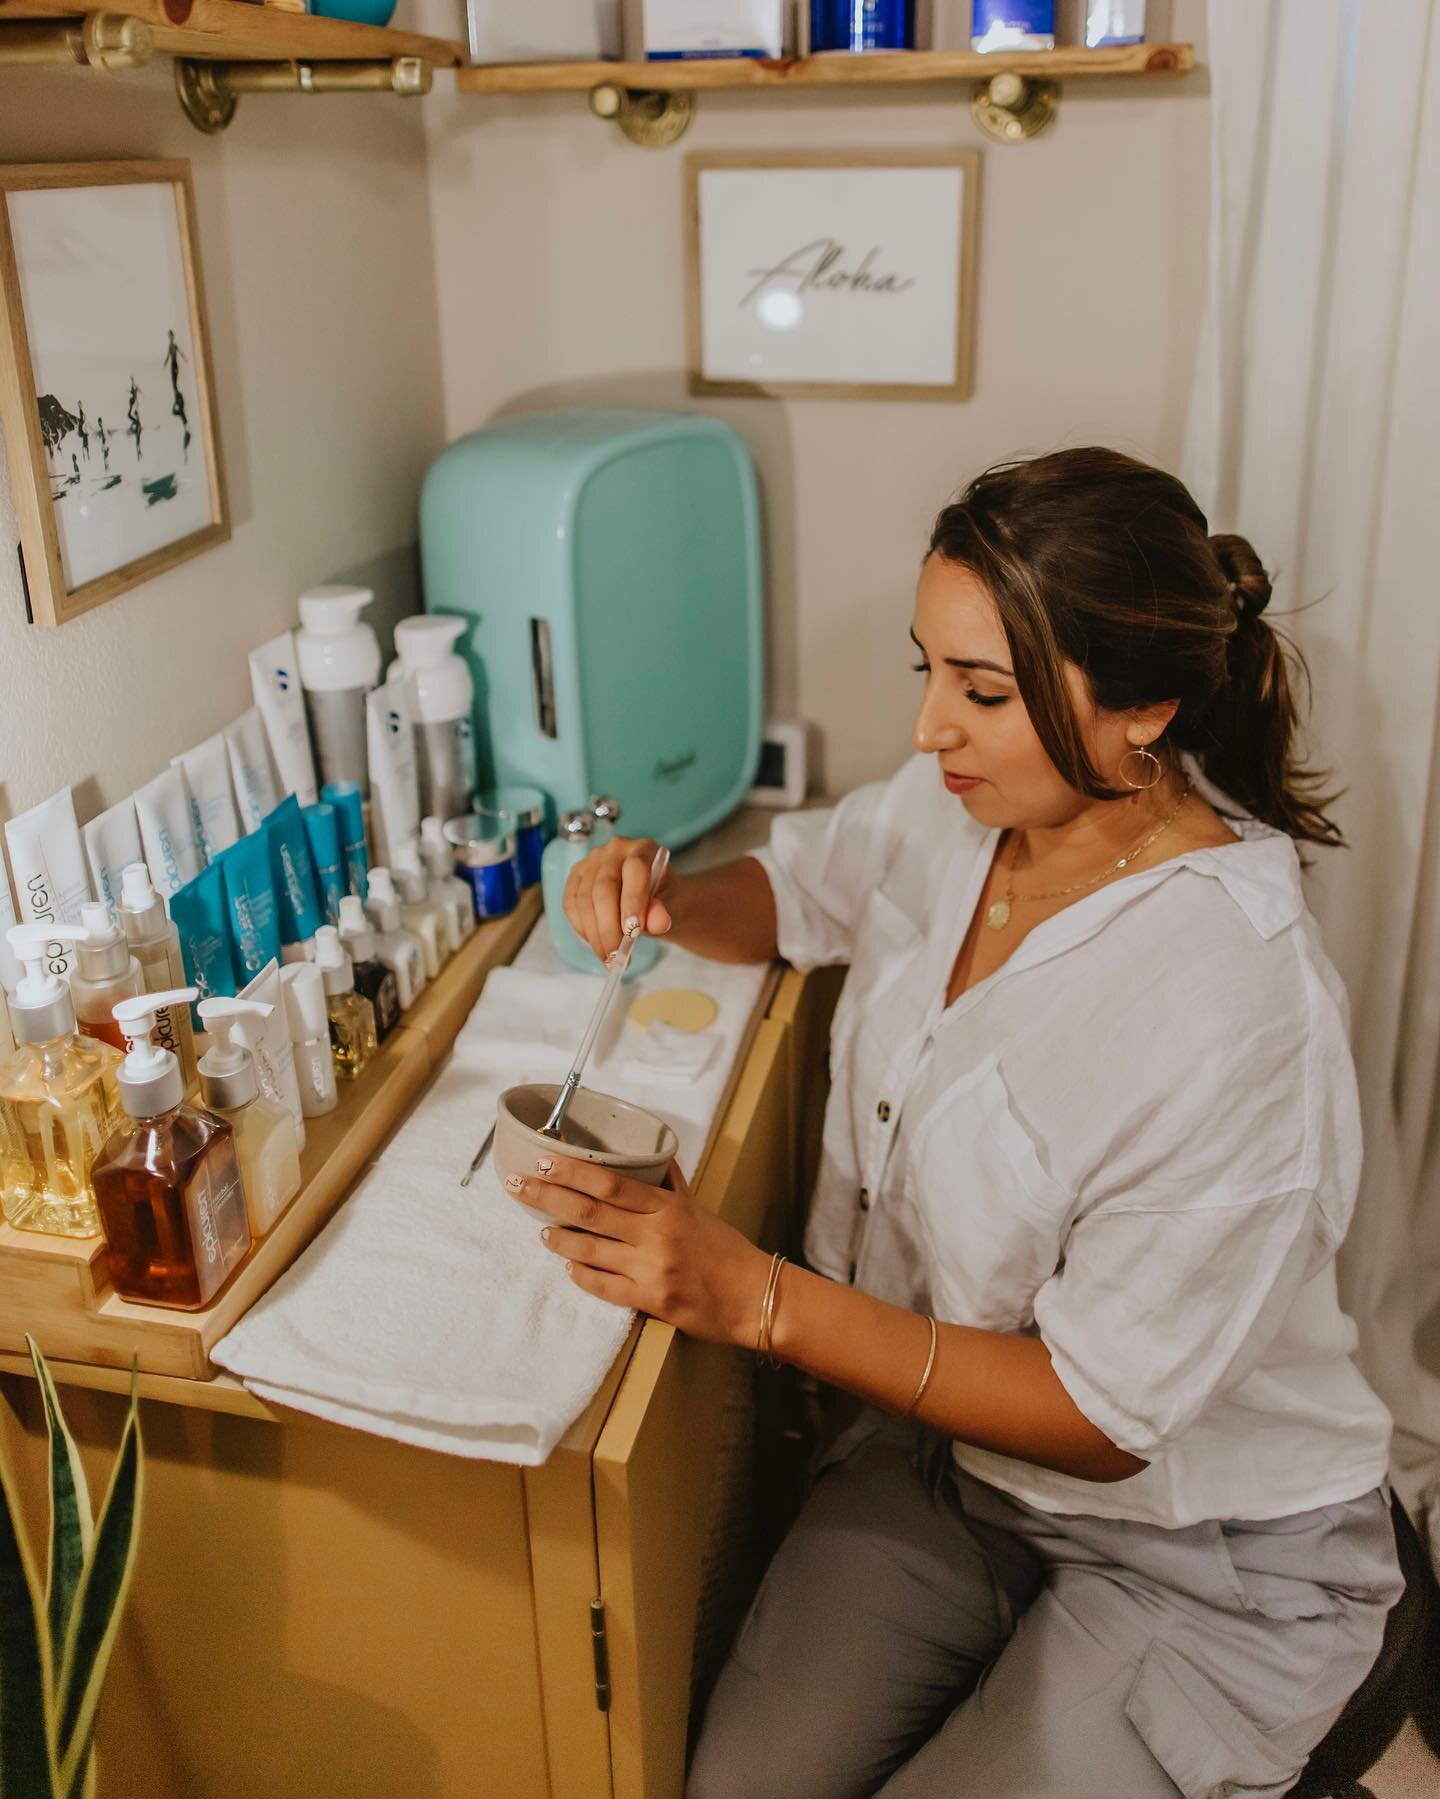 Ready for fast results and happy skin? 🙋🏽&zwj;♀️

Consultations are a great idea for taking the guessing out of your skincare and facial game. A Licensed Esthetician will listen to your concerns and lead you to the best skin of your dreams! 

Click